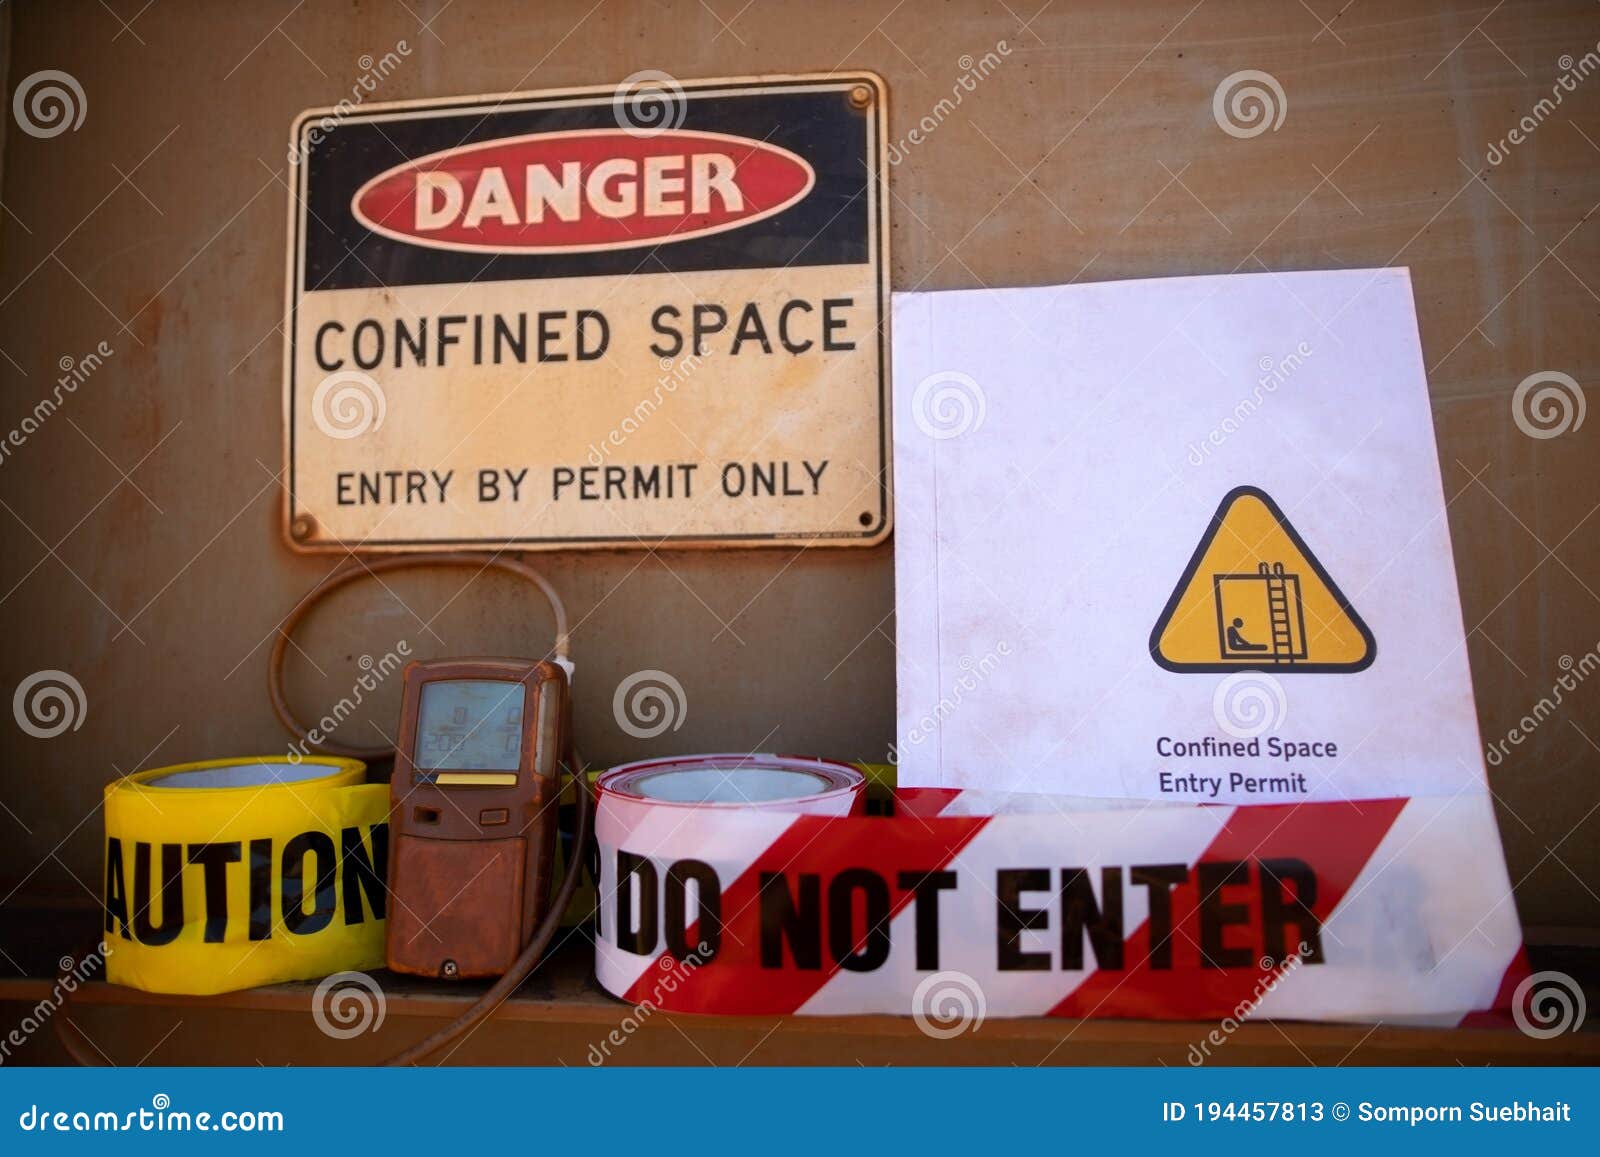 gas test leak atmosphere confined space warning sign permit entry by permit only and red barricade danger tape